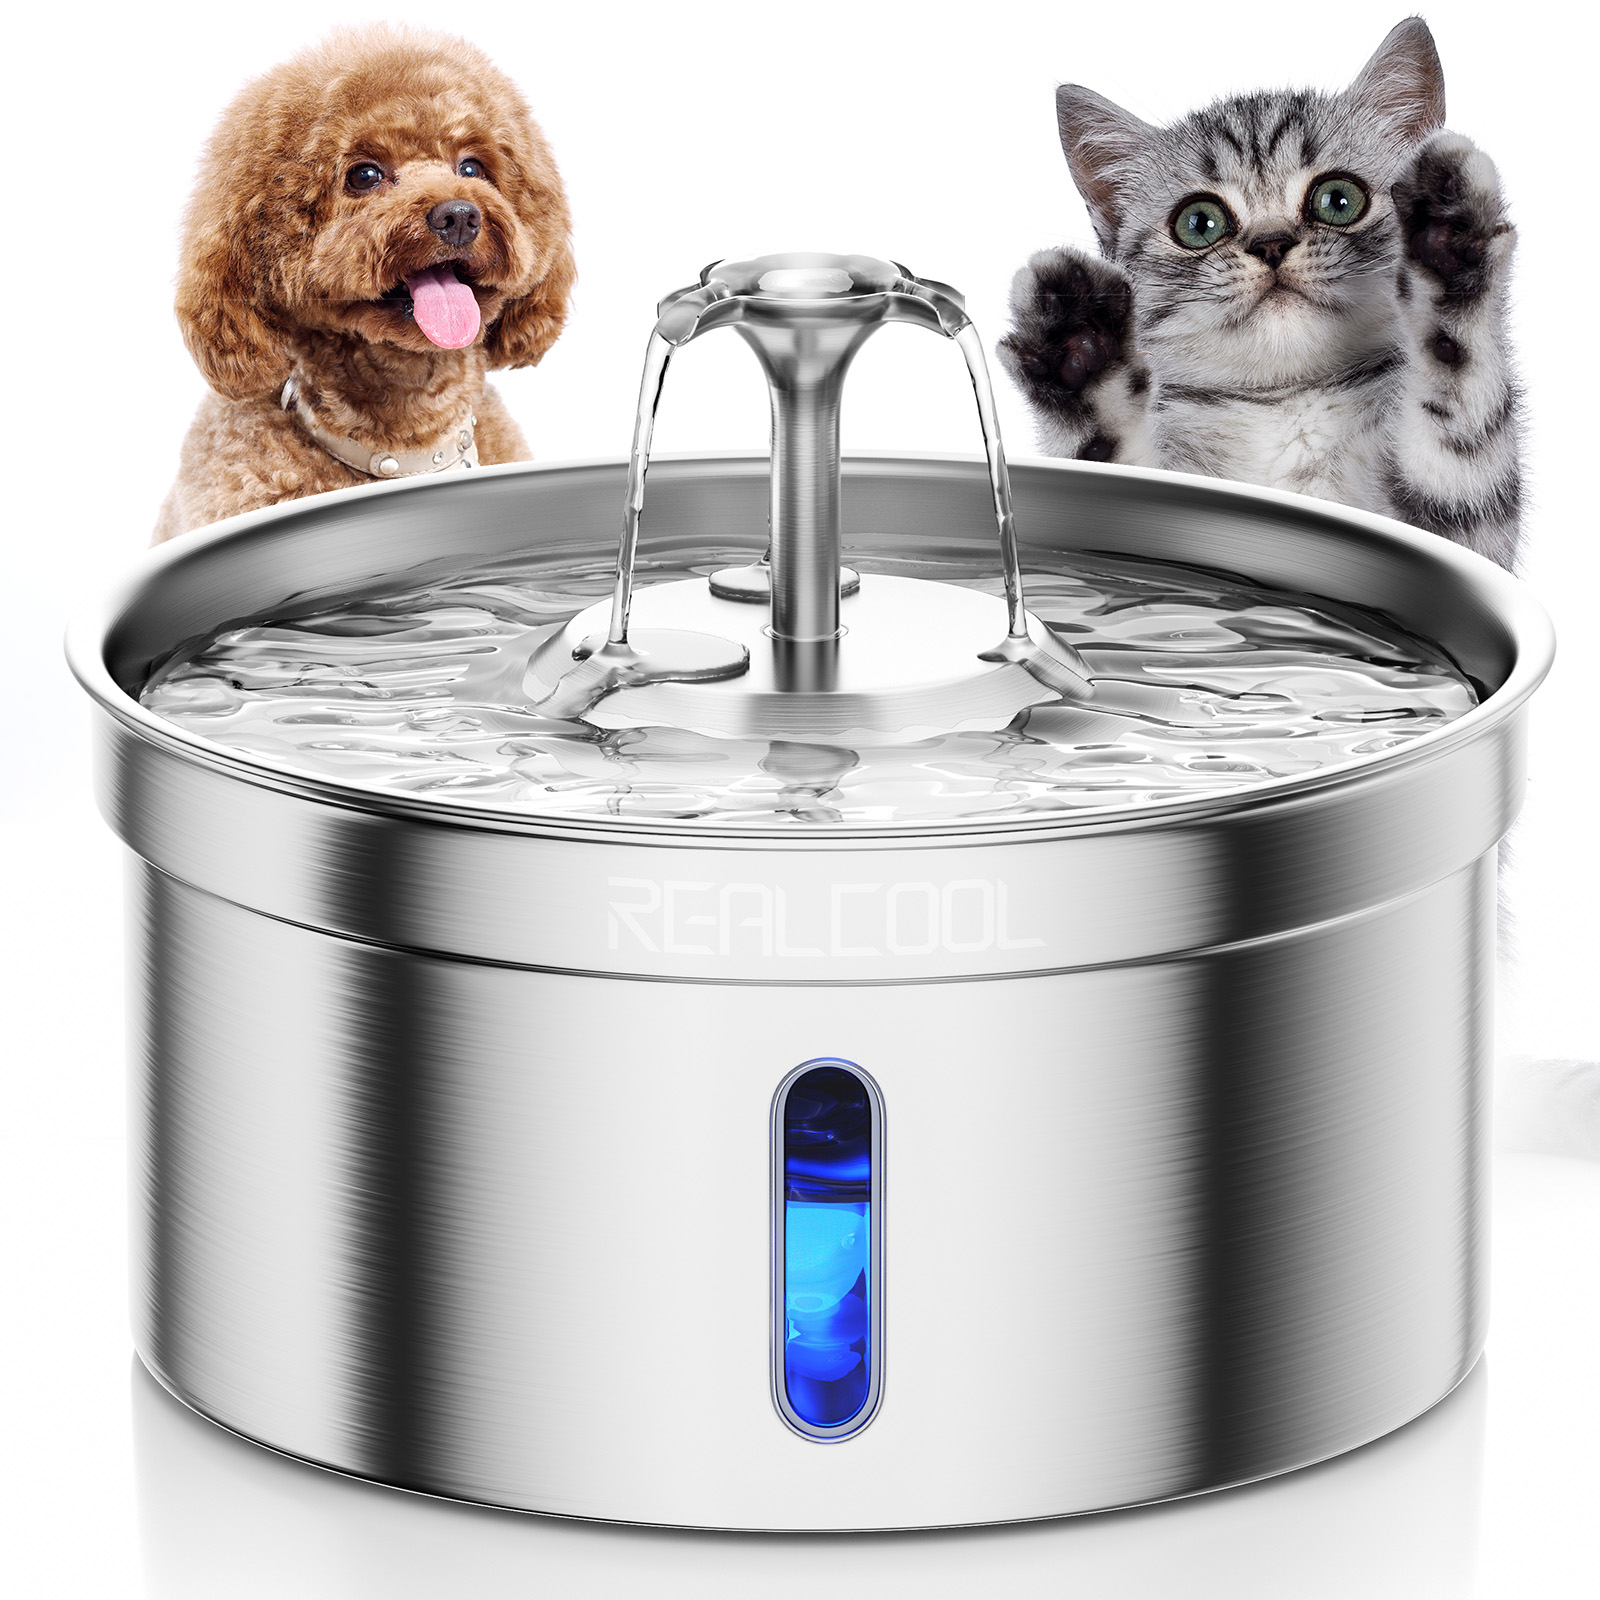 

Cat Water Fountain Stainless Steel 3.8l/130oz,large Capacity Pet Water Fountain For Cats Inside, Automatic Dog Water Dispenser With Quiet Pump, Suitable For Multi-pet Households